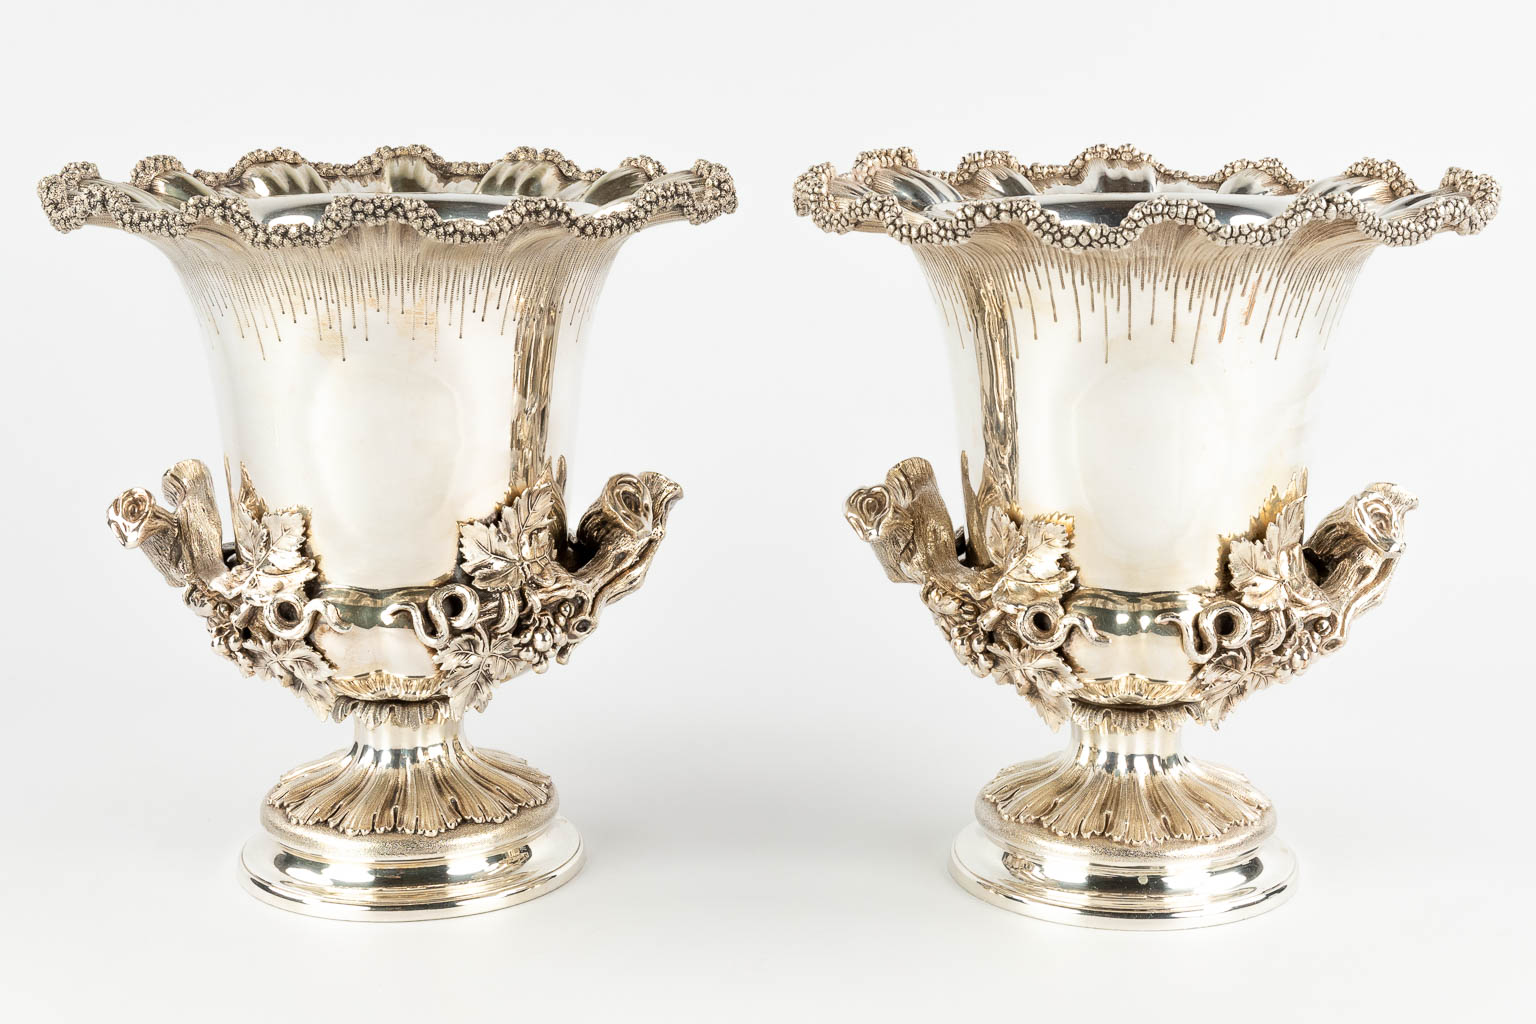 Elkington, UK, a pair of wine coolers, silver-plated metal and decorated with grape vines. 20th C. (H:28 x D:26 cm)